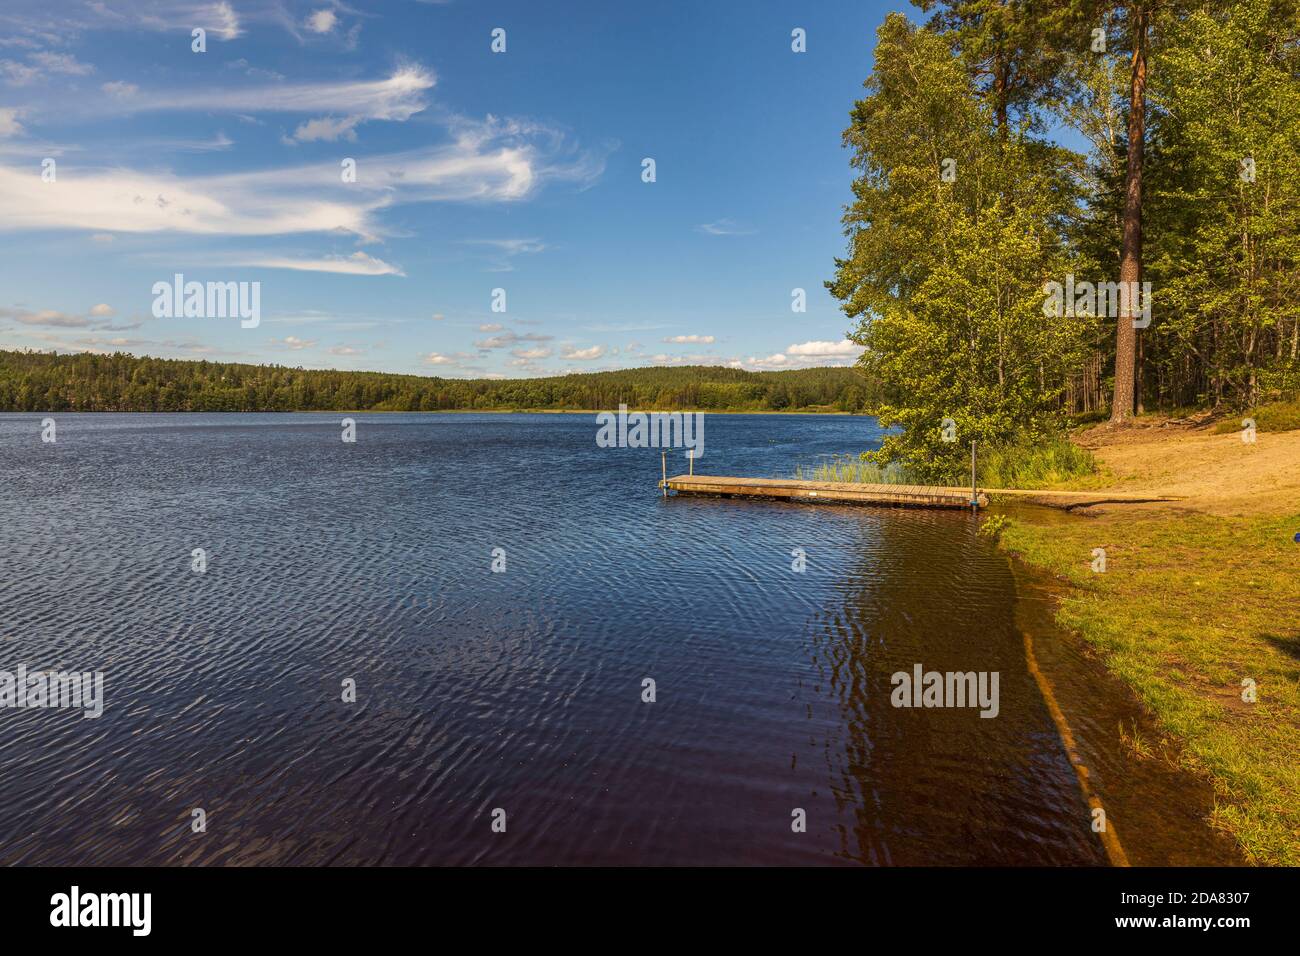 eautiful view of calm lake water surface with local swimming plays Coast line merges with horizon line. Green plants and blue sky on background. Stock Photo